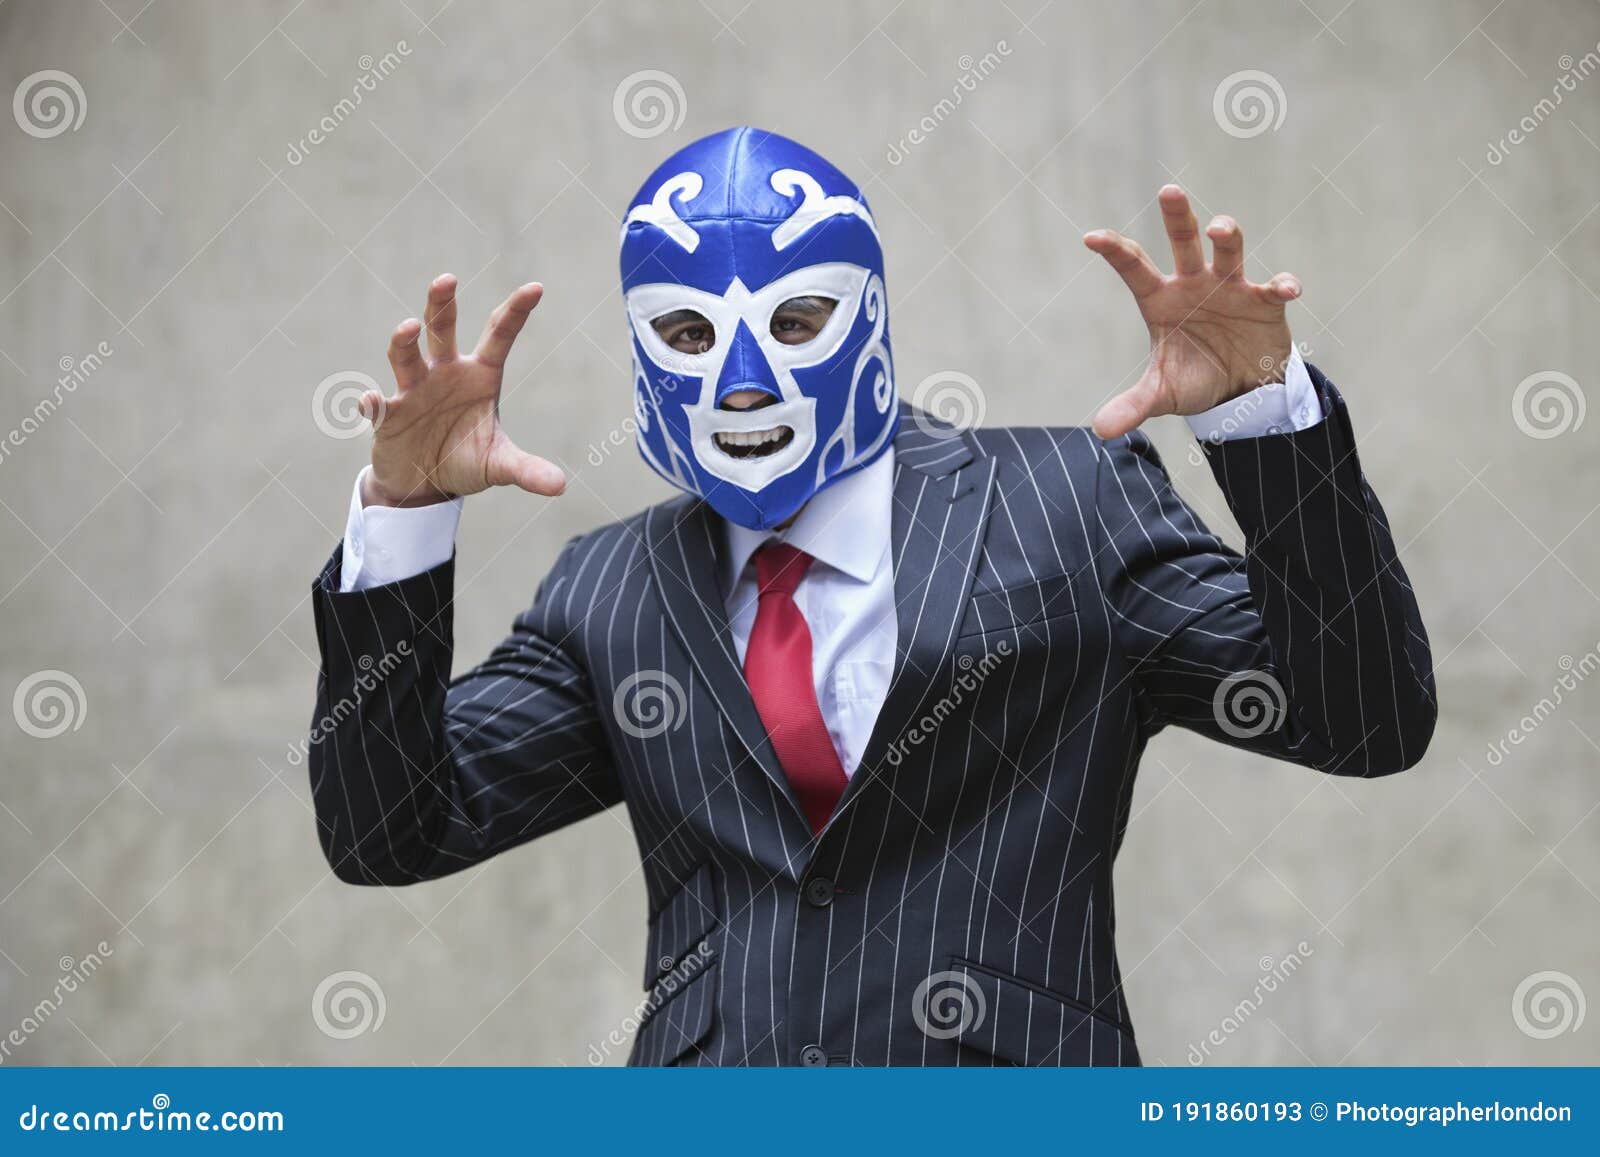 young businessman gesturing in wrestling mask and pinstripes suit over gray background